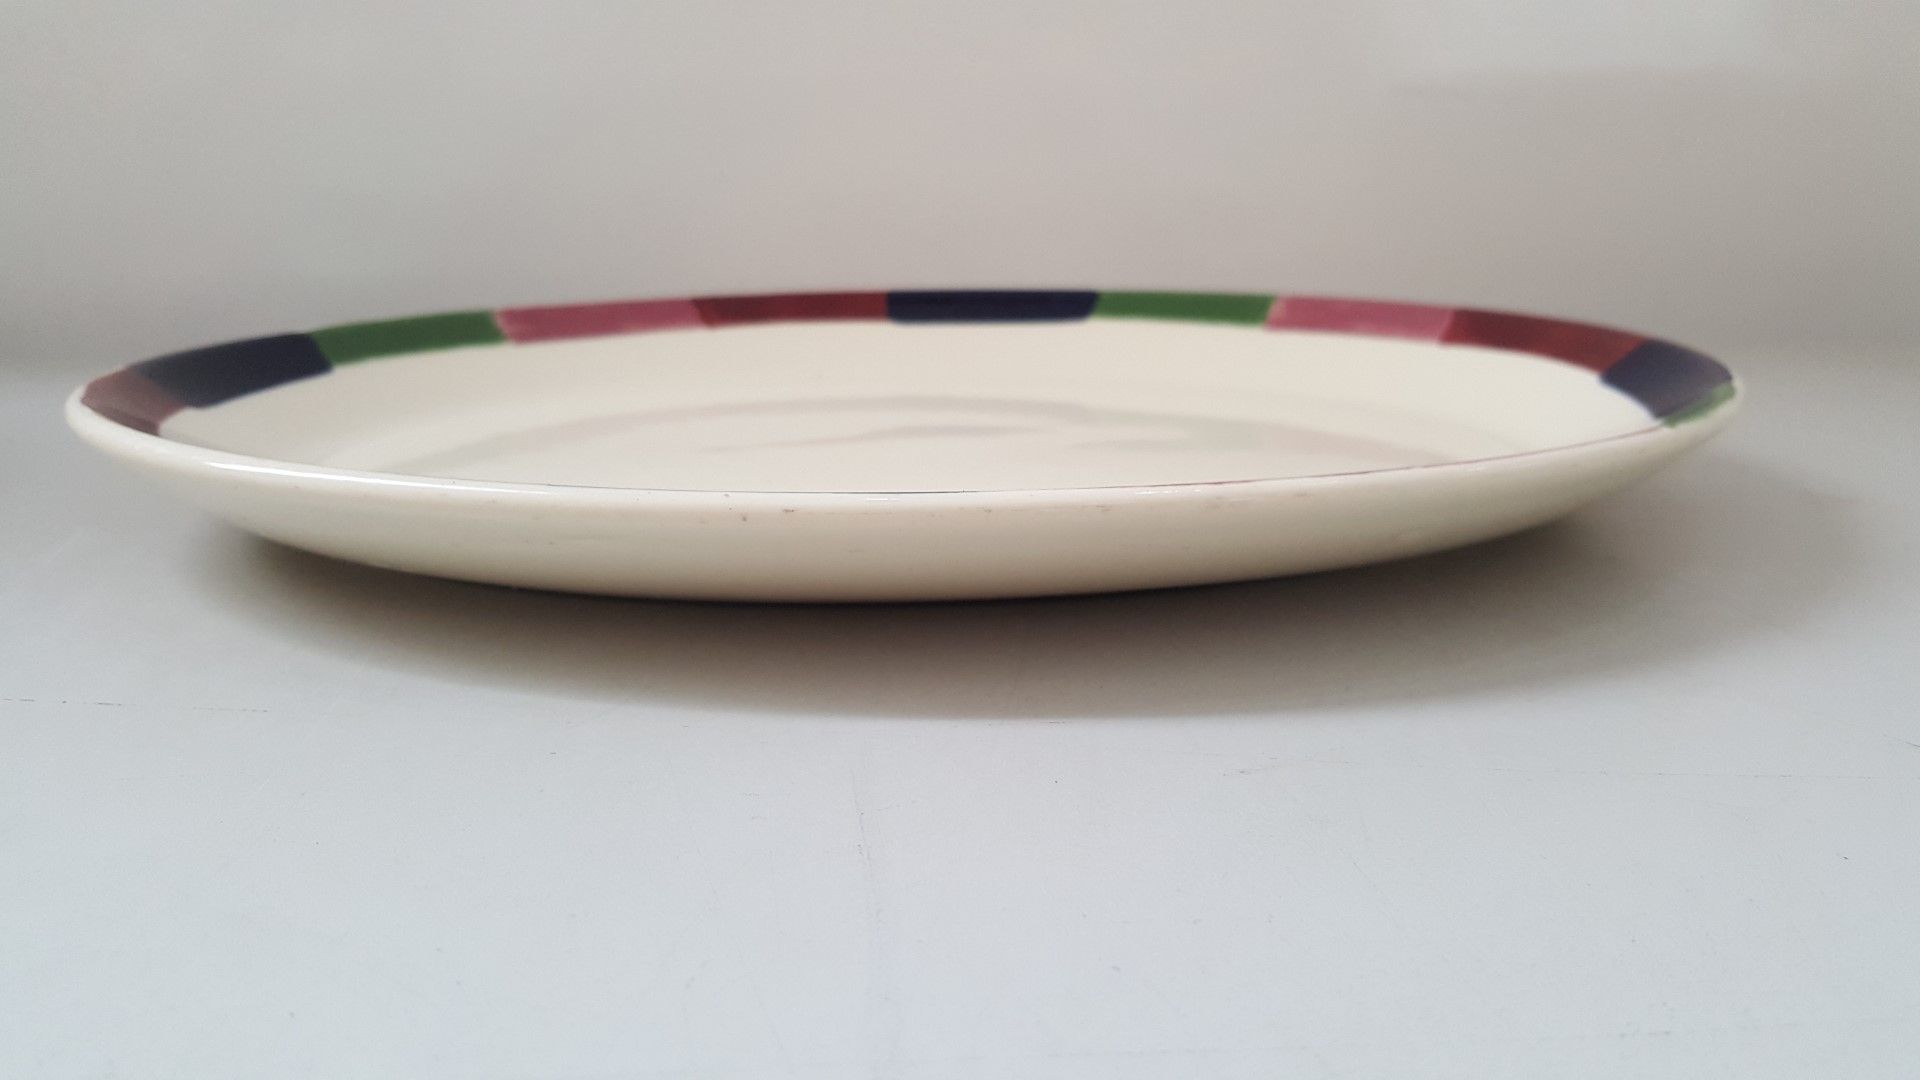 14 x Steelite Oval Serving Plates Cream With Patterned Edge L30/W23.5CM - Ref CQ270 - Image 3 of 4